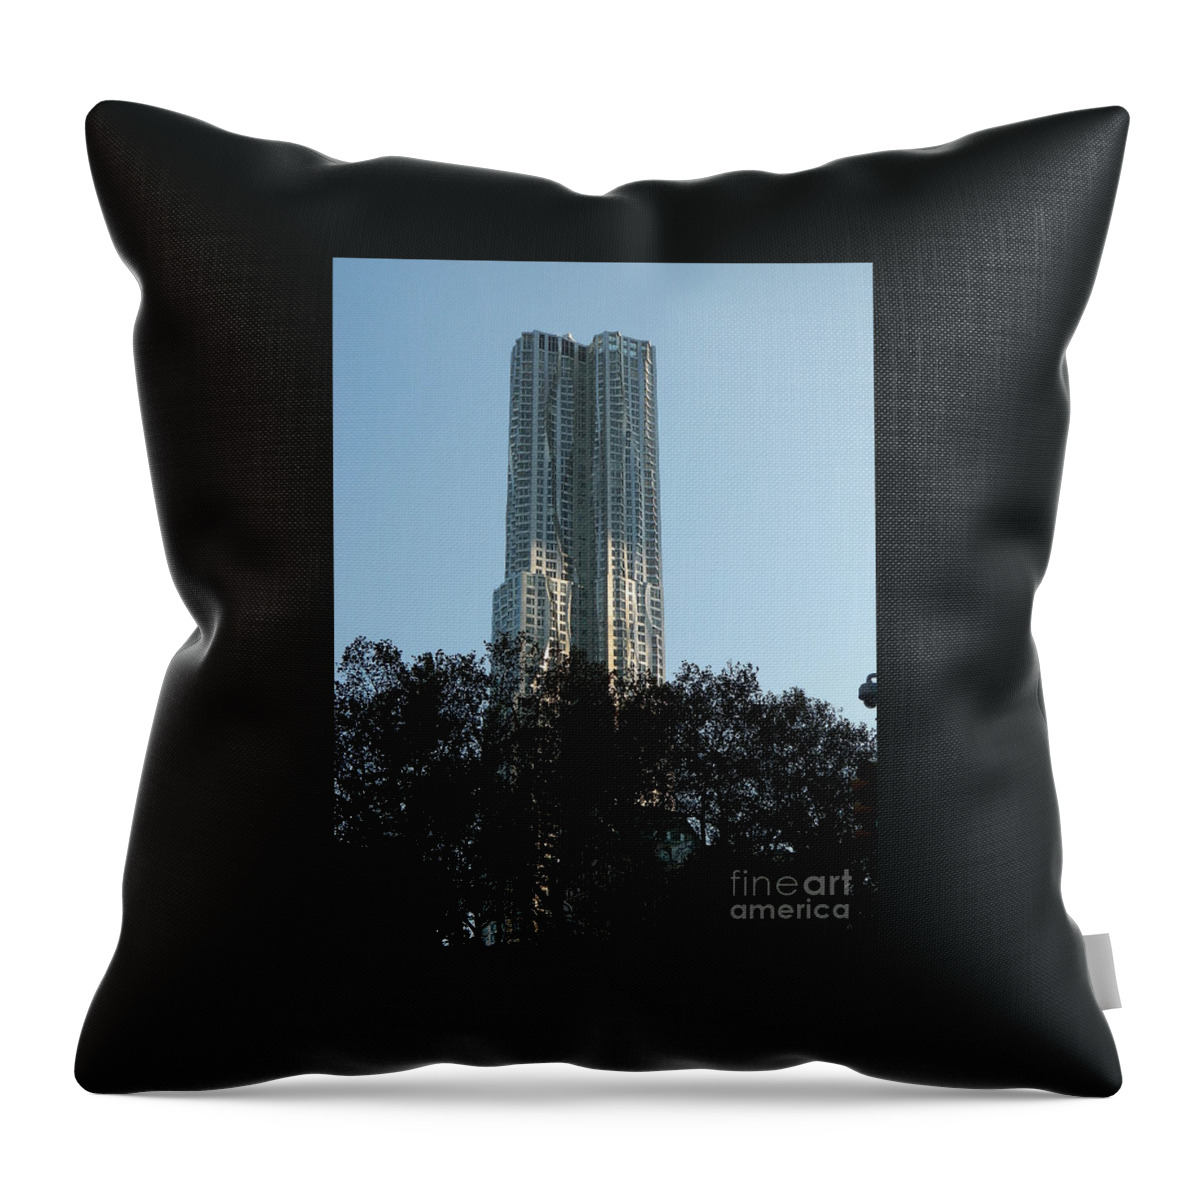 New York By Gehry Building Throw Pillow featuring the photograph New York By Gehry Building by Emmy Vickers